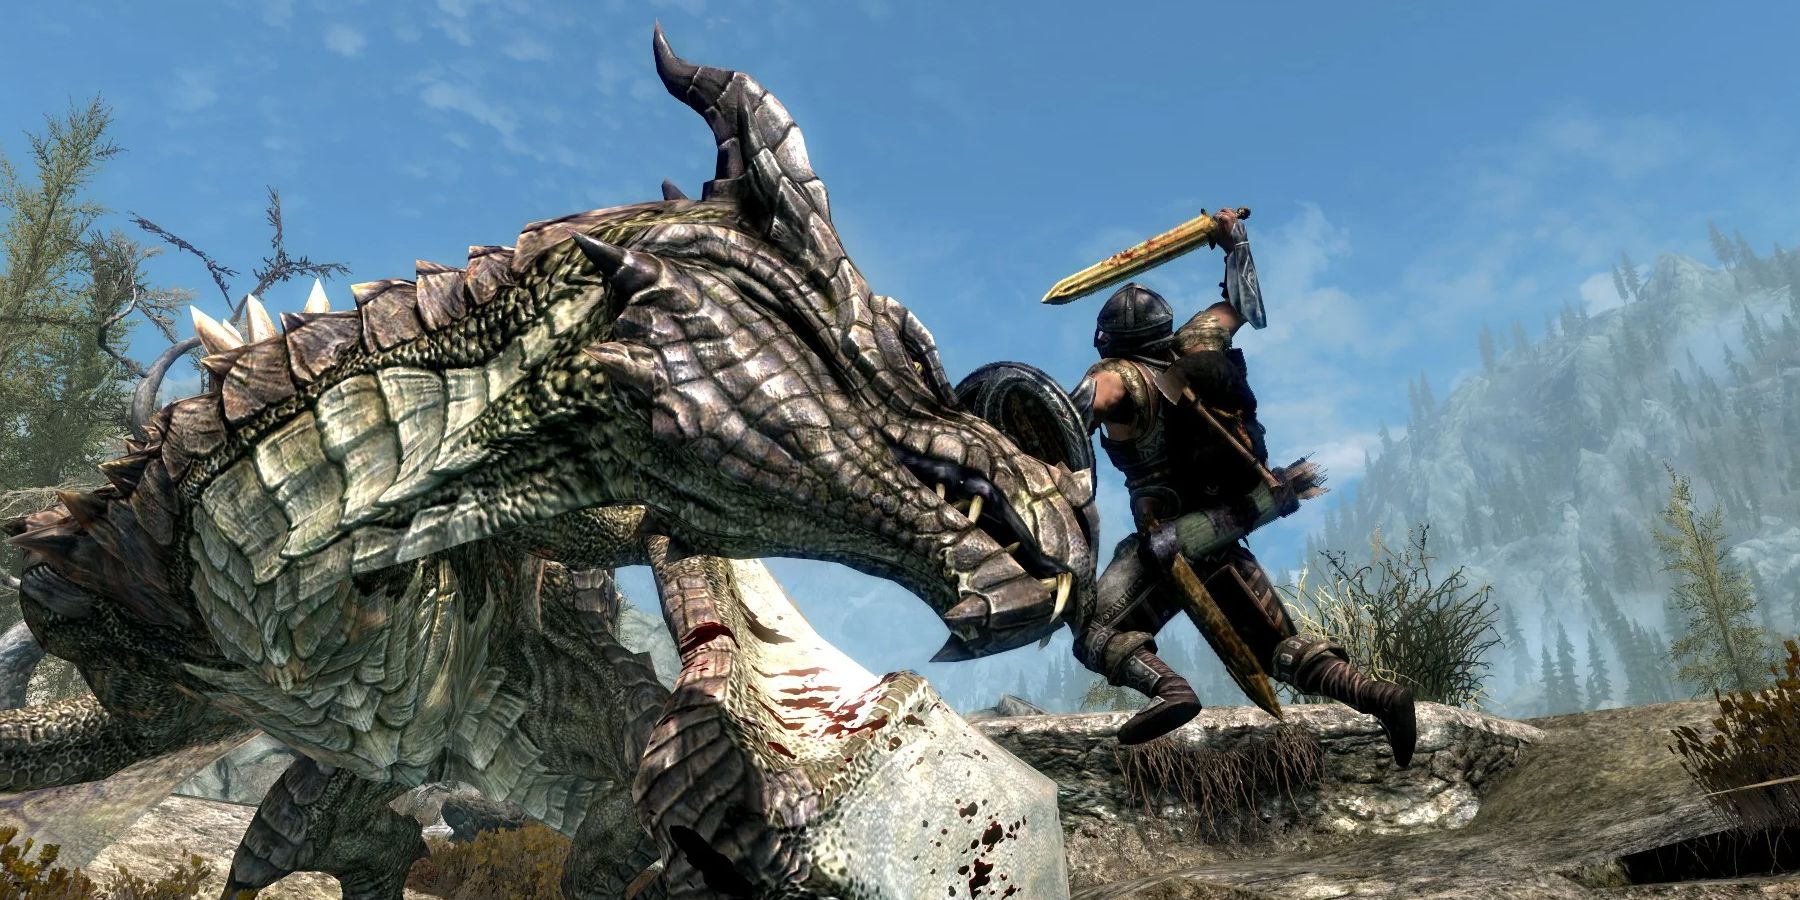 Famous Elder Scrolls Mods Now Available on GOG For Free